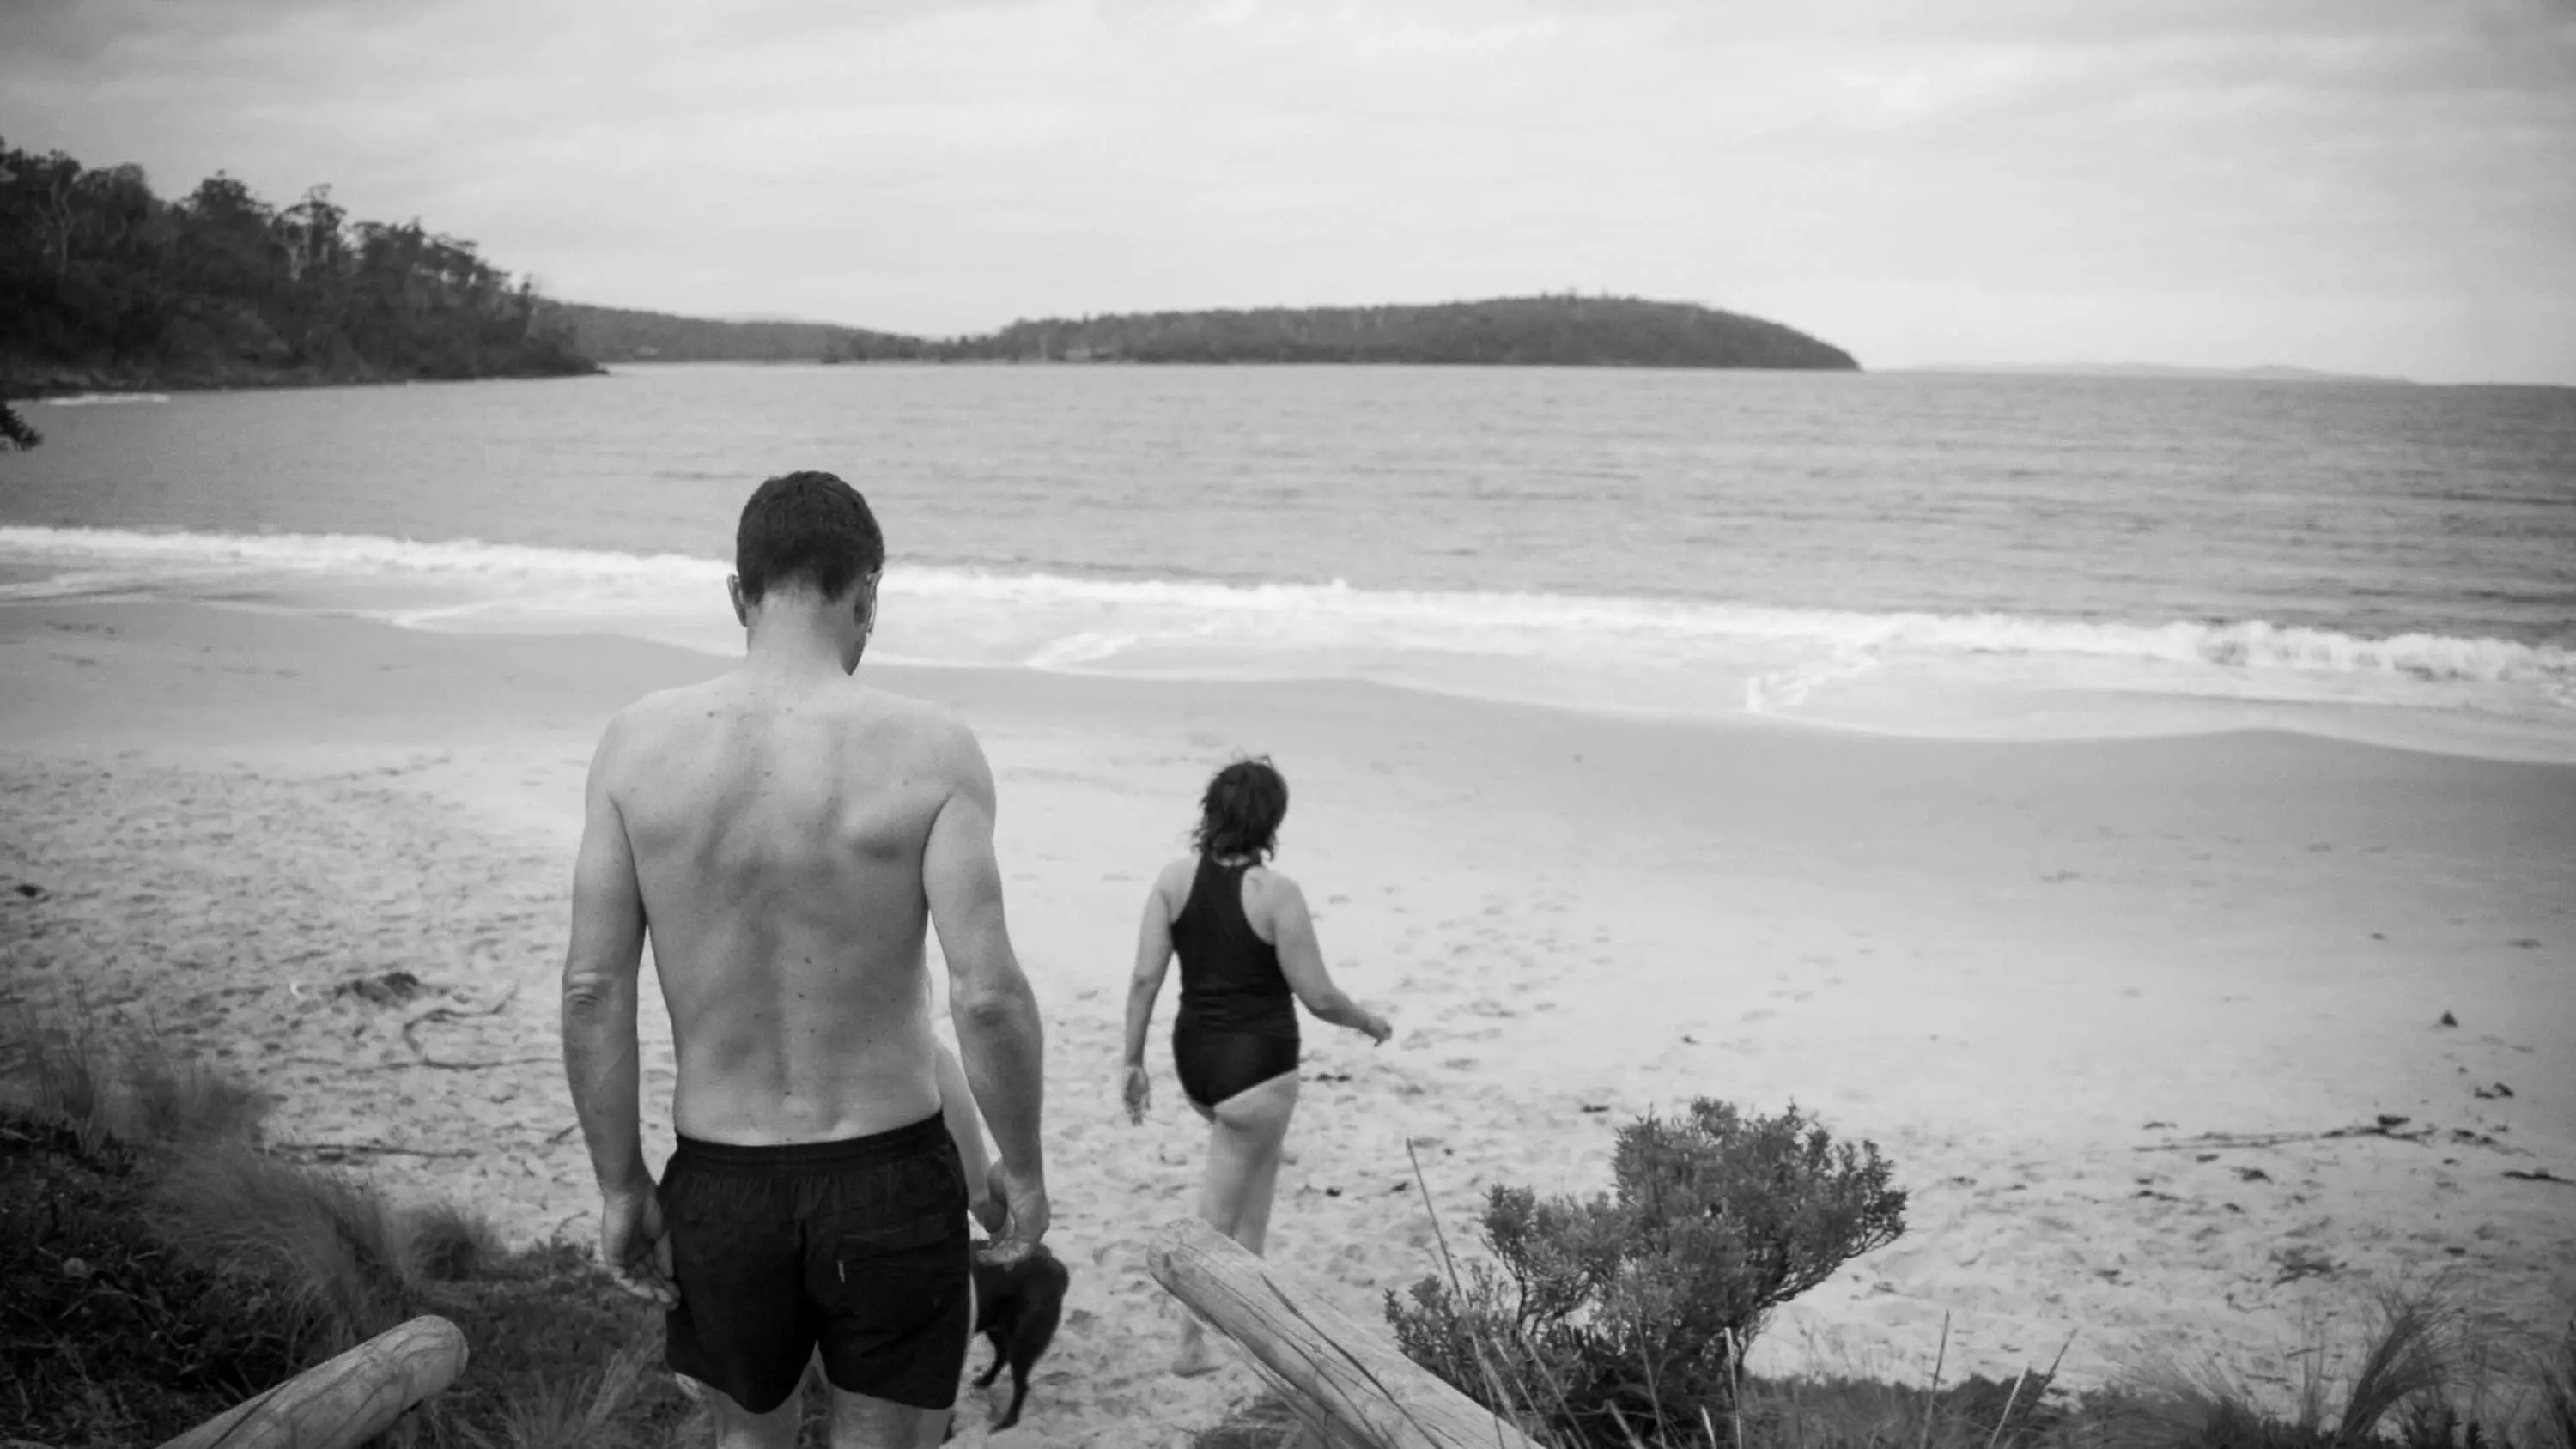 A man and woman wearing swimming gear walk down some steps to the sand on a wide beach towards the water.